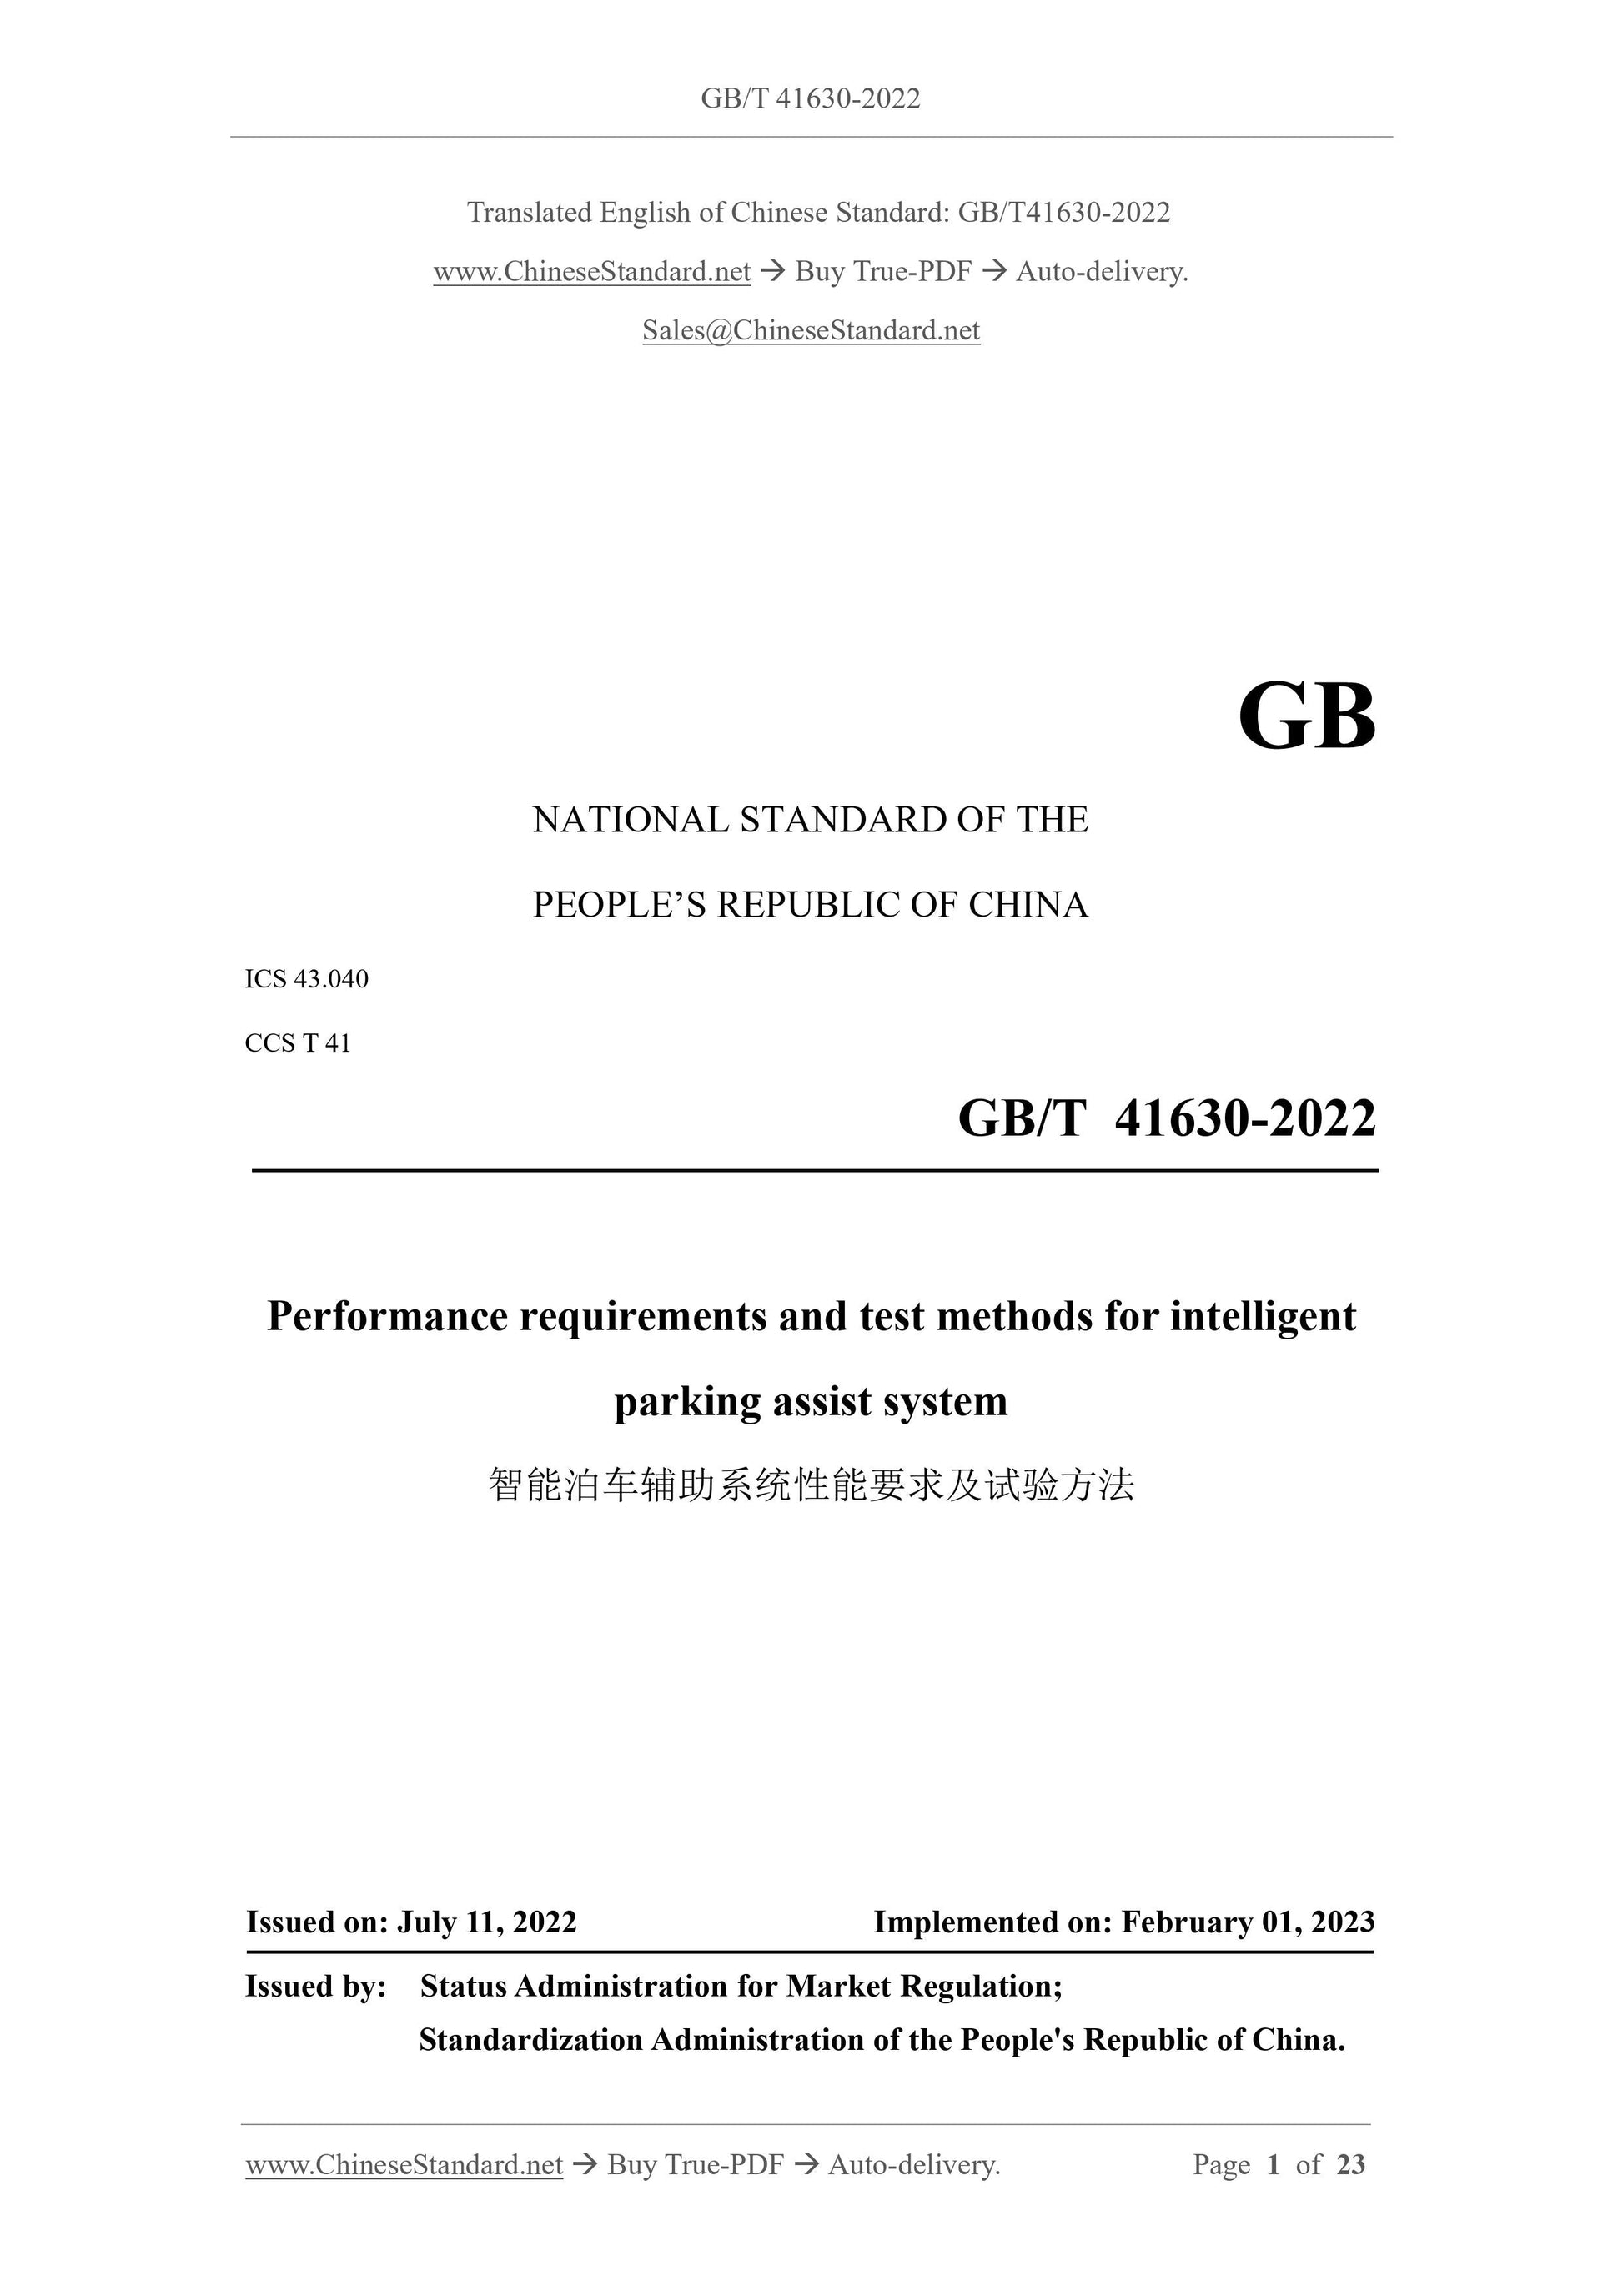 GB/T 41630-2022 Page 1